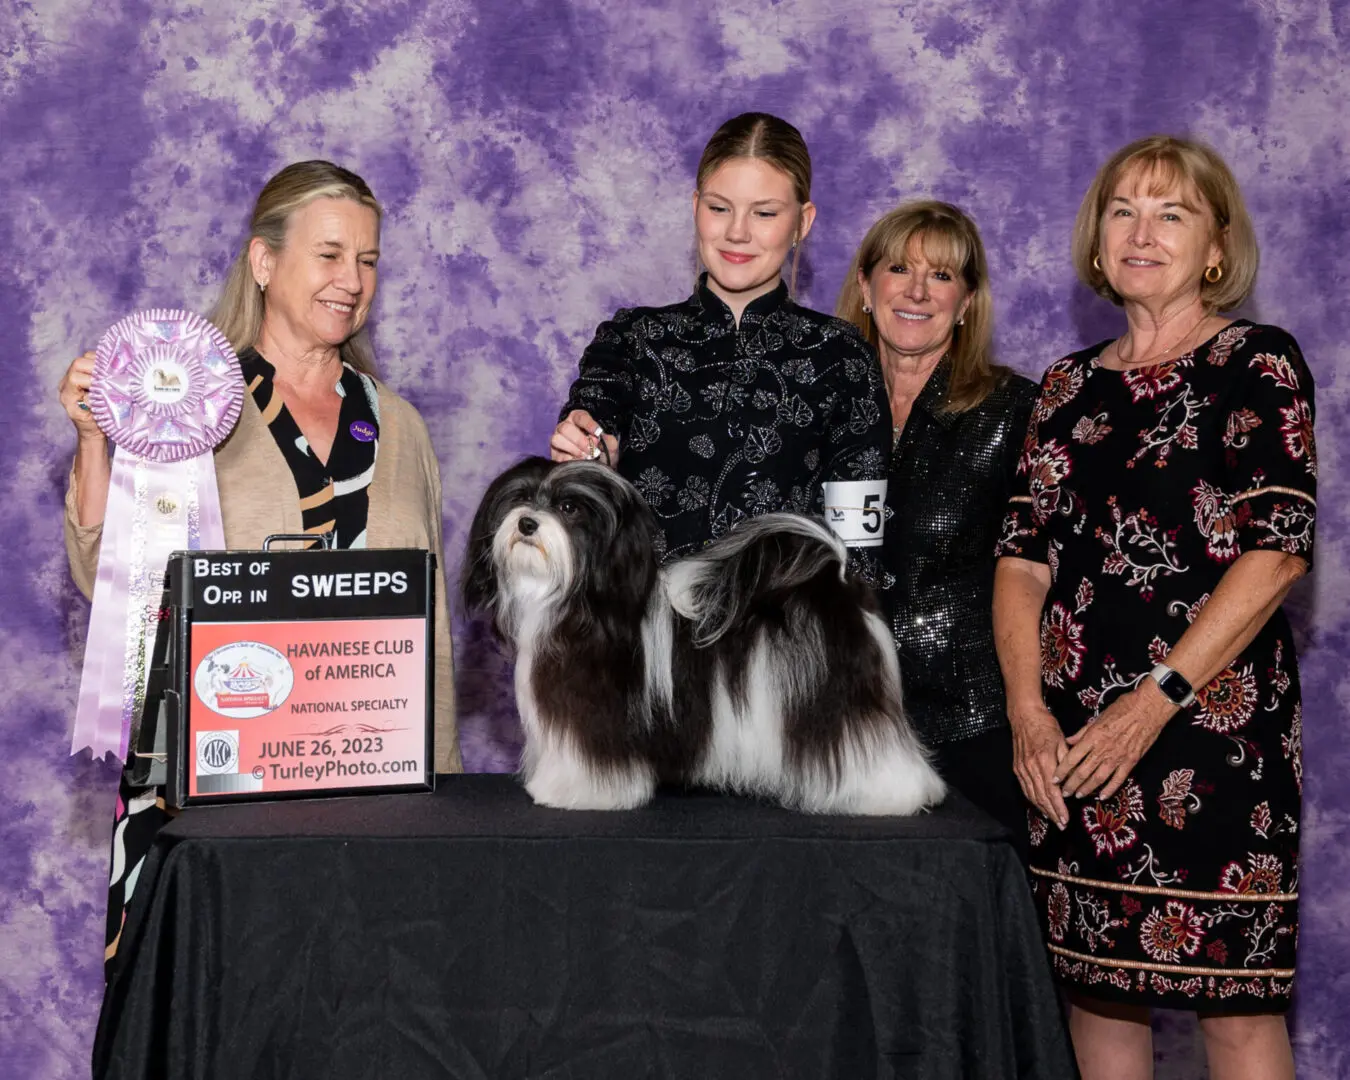 A group of people posing with their Havanese show dogs at a dog show in Chicago, IL.